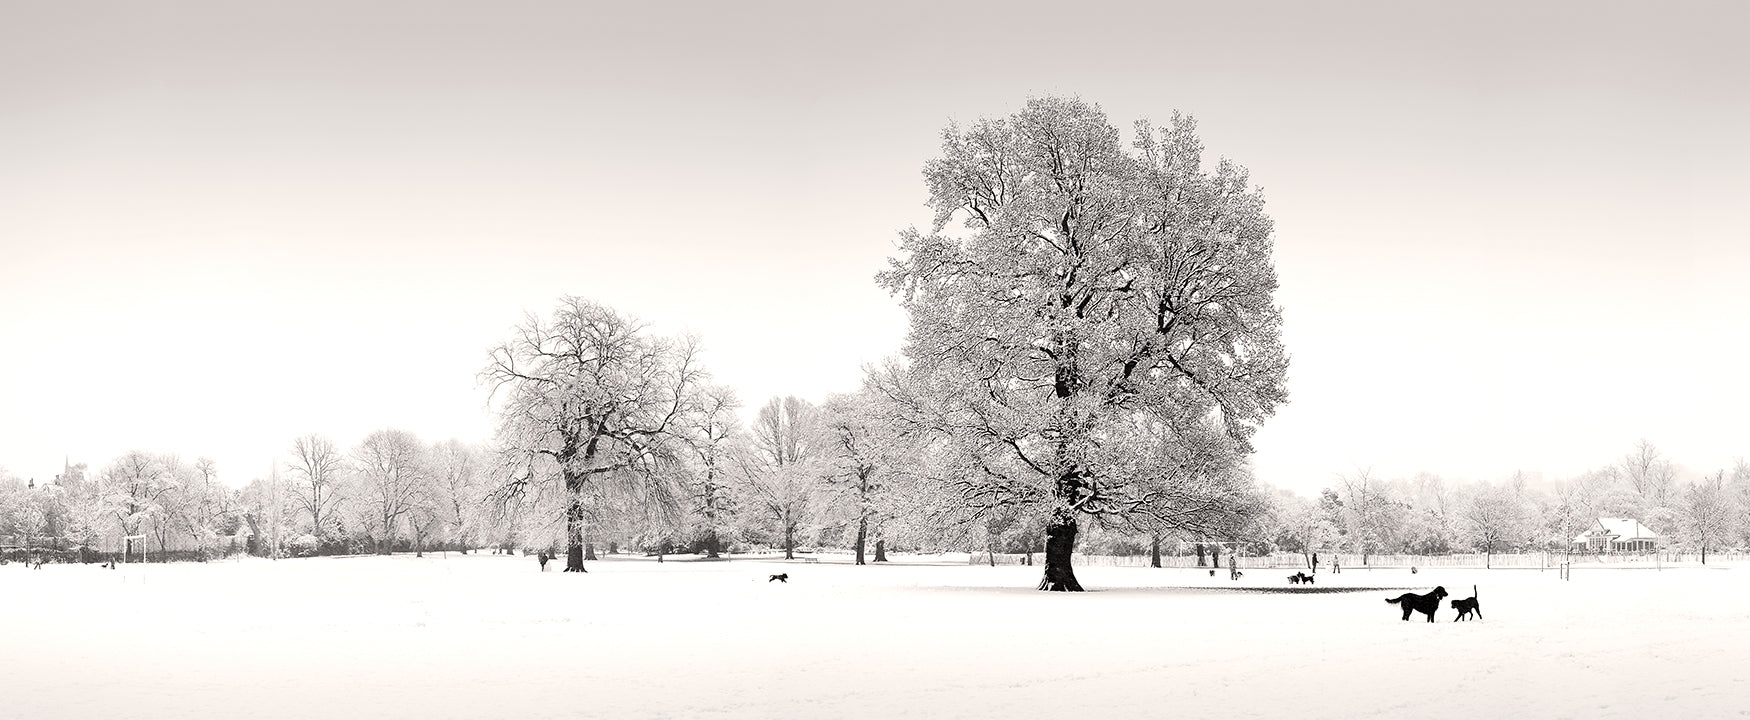 Dulwich Park in the snow